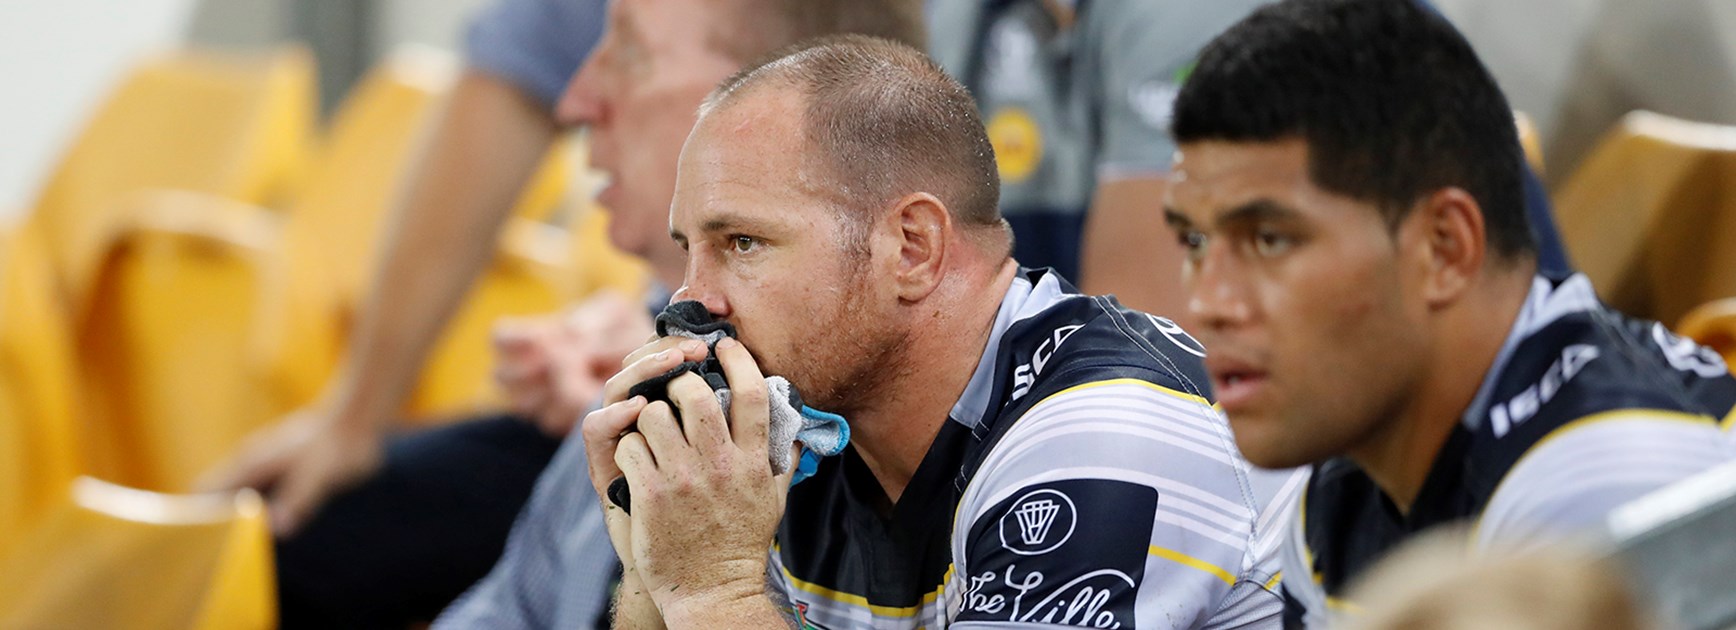 North Queensland prop Matt Scott was one of several Cowboys injured in the Round 2 clash with the Broncos.